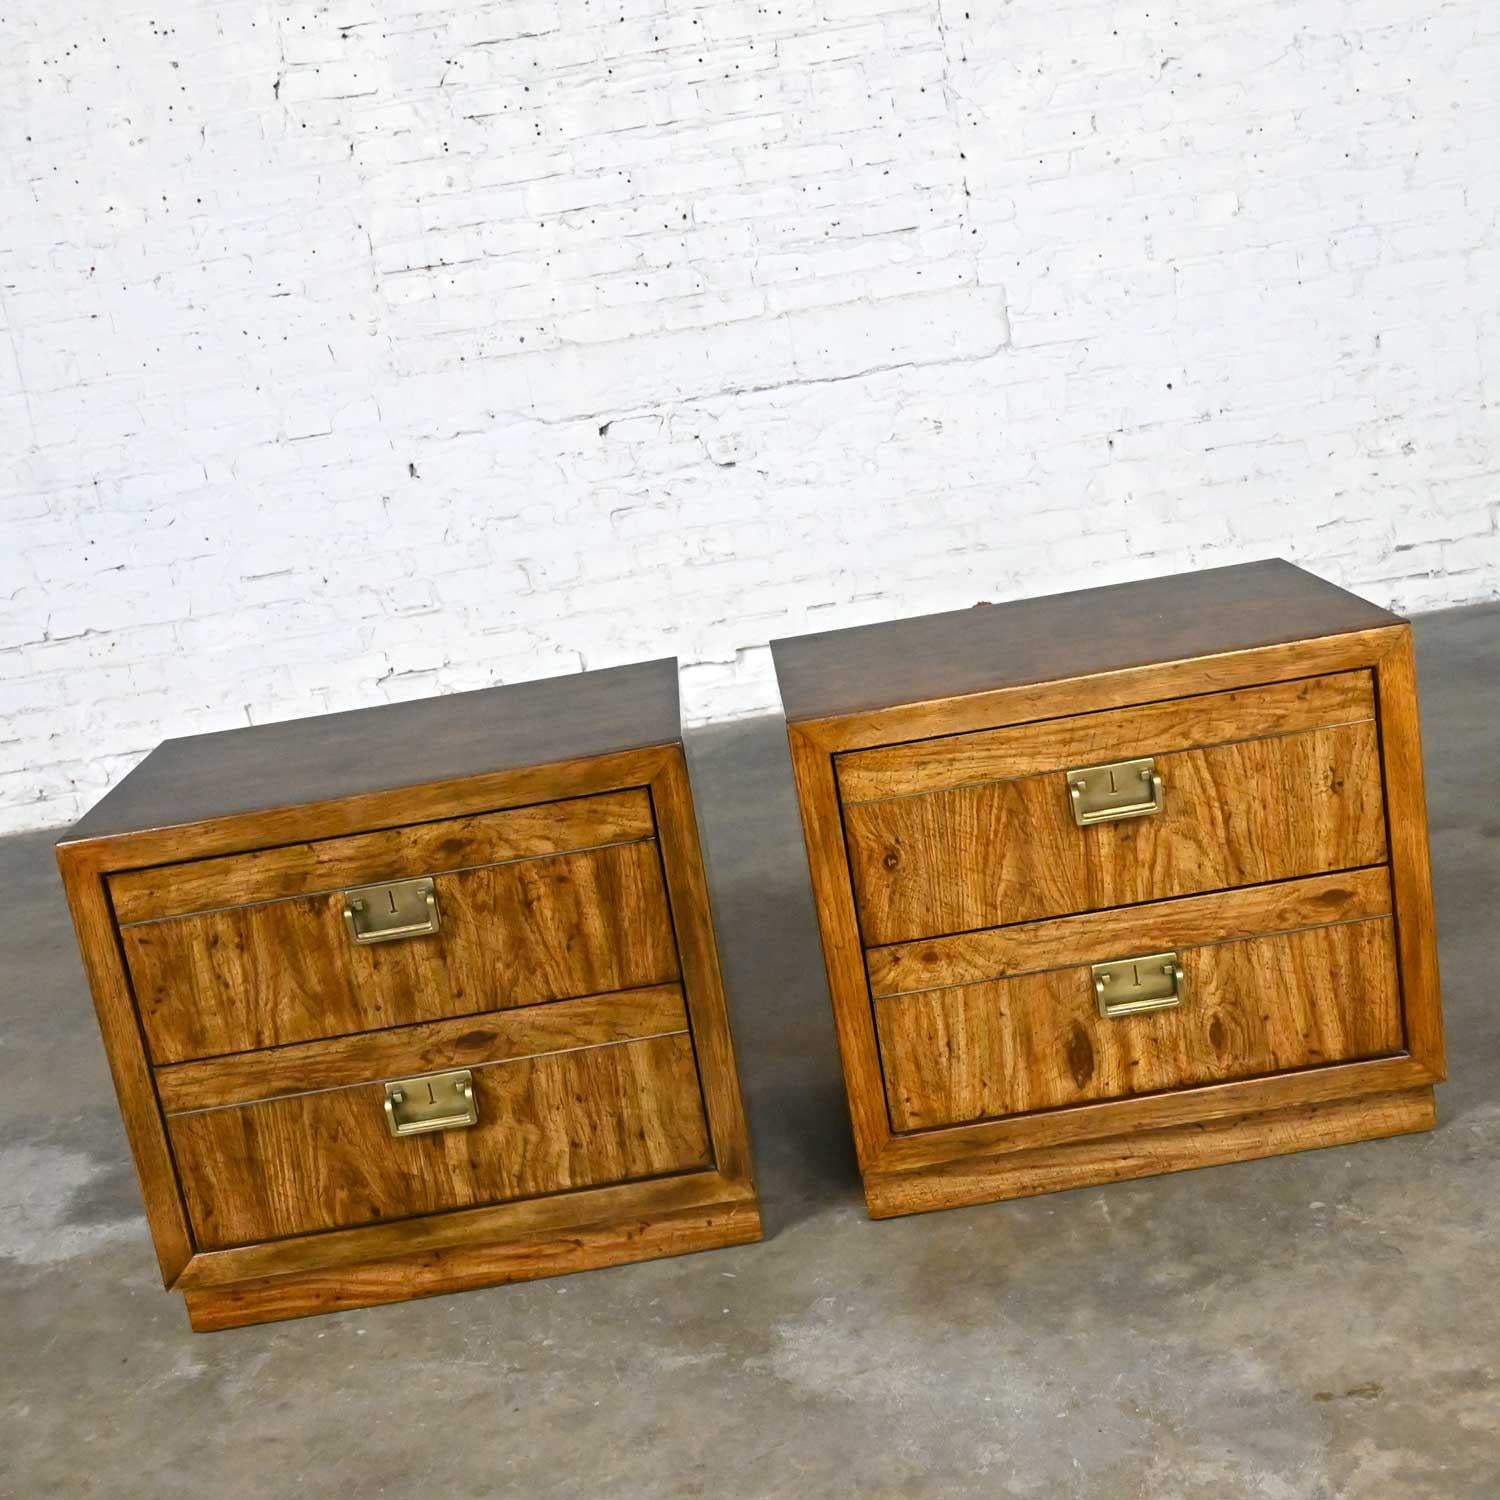 Fabulous vintage Drexel Weatherwood Collection Campaign cabinet style nightstands or end or side tables with brass plated hardware. Beautiful condition, keeping in mind that these are vintage and not new so will have signs of use and wear. The top